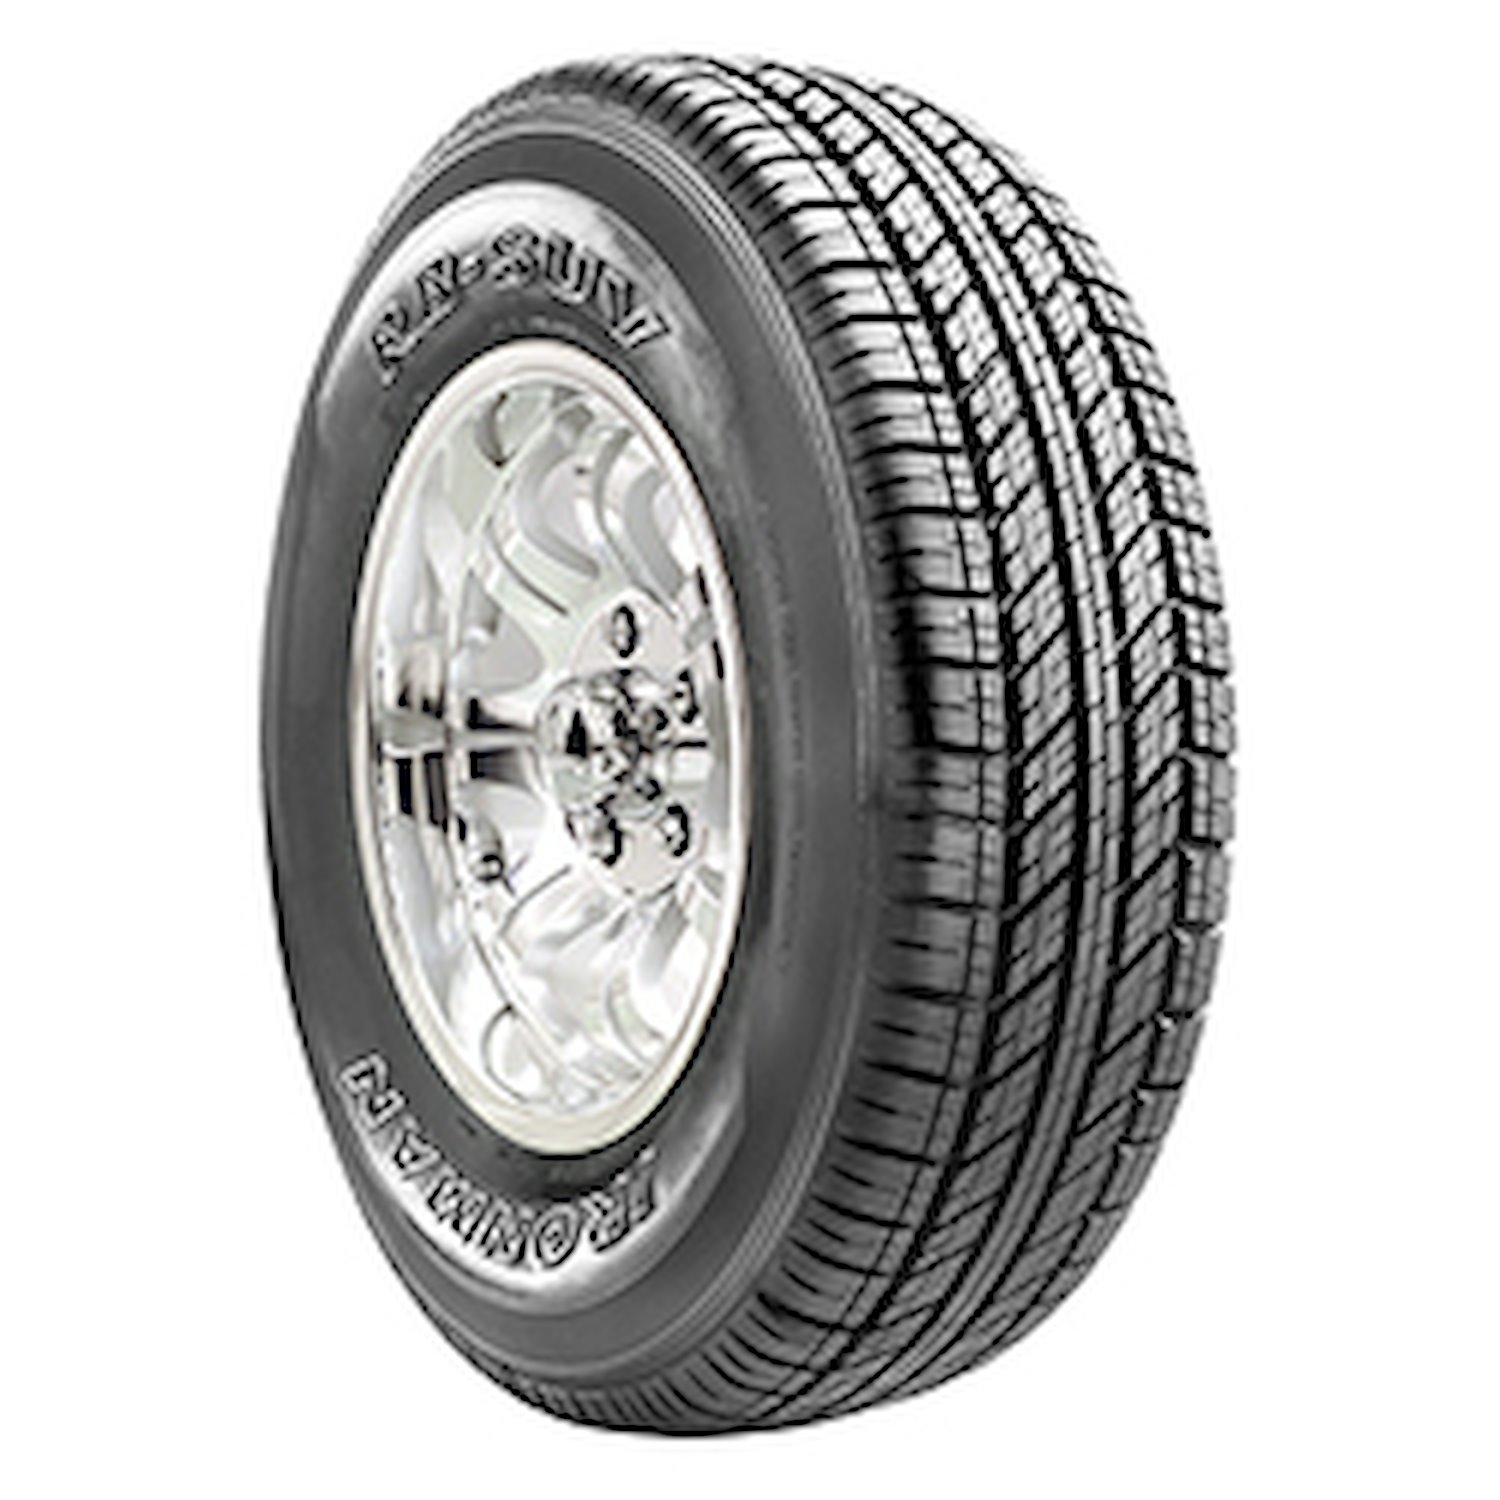 RB SUV Tire, 215/70R16 100S